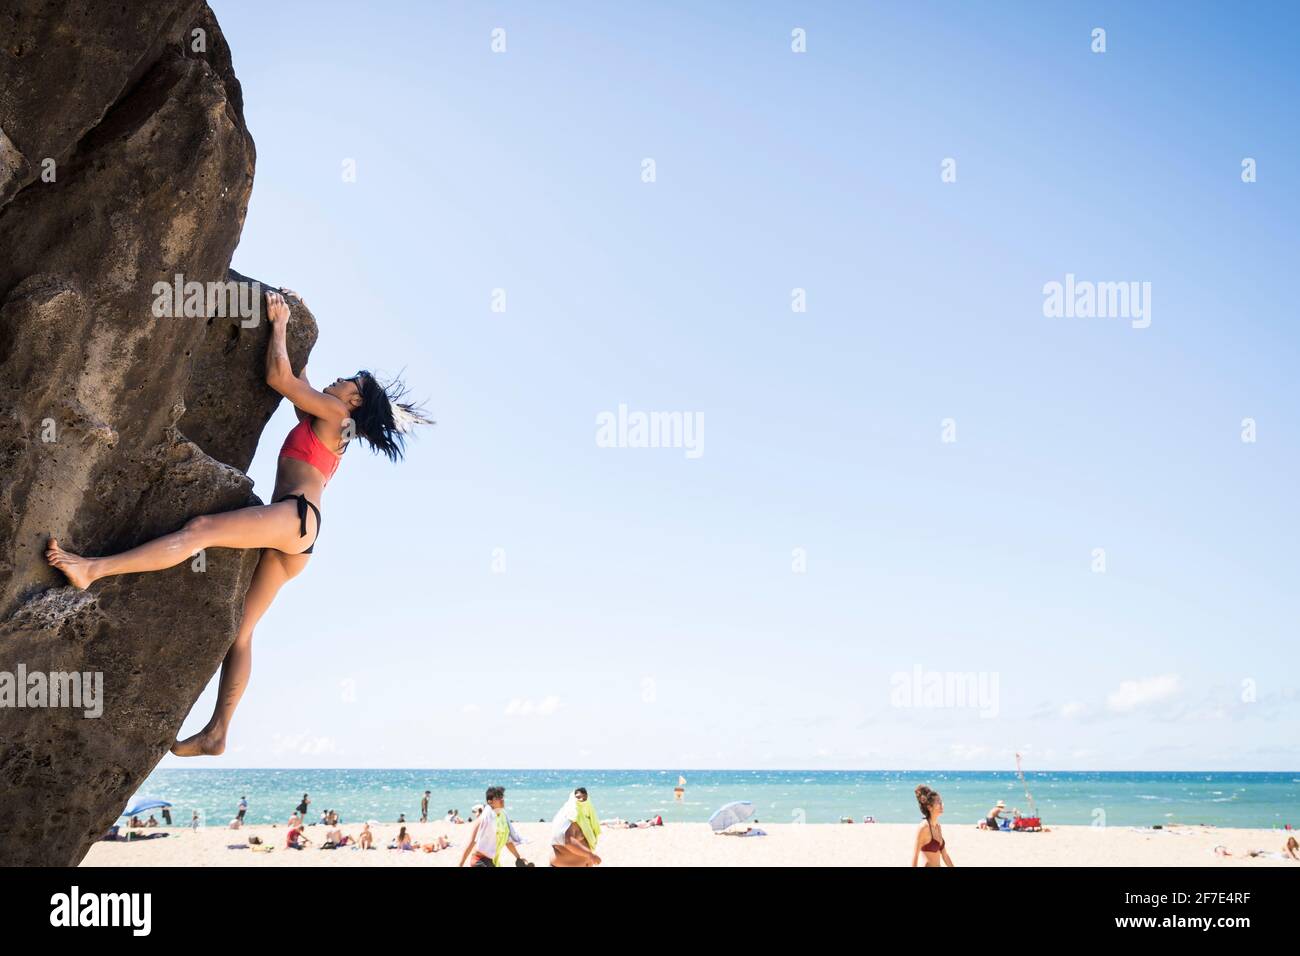 Daring lady scaling a boulder with no harness on a sunny beach in Oahu Stock Photo